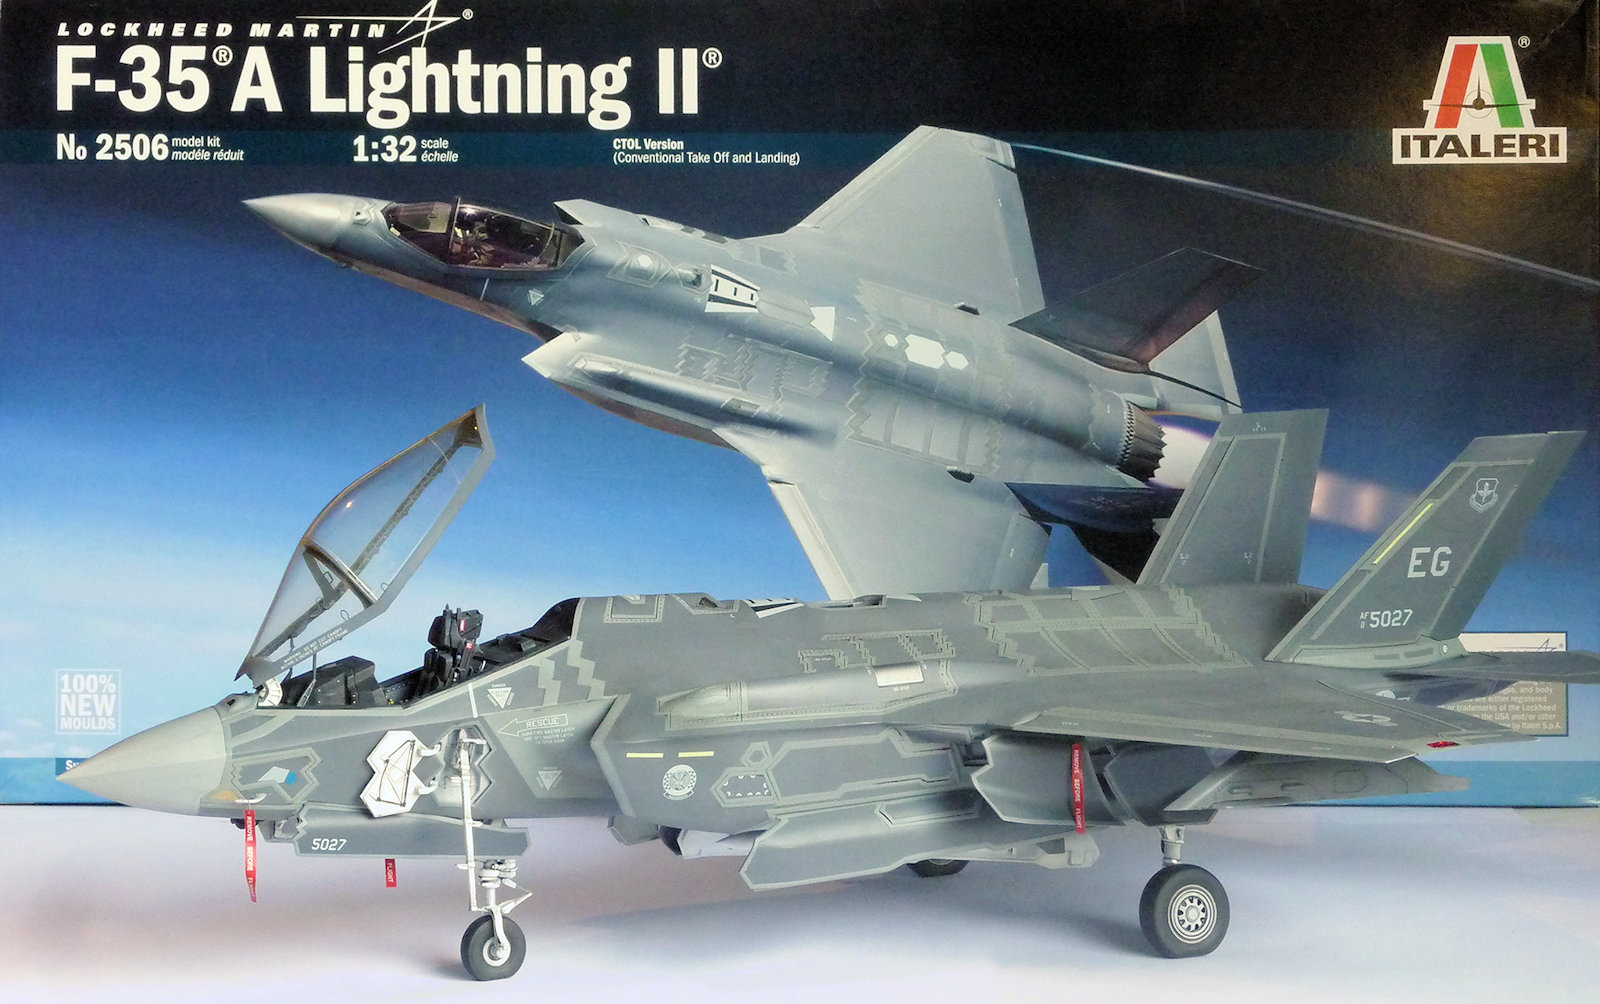 The Modelling News: Build Guide: Italeri's 1/32 F-35 Part III